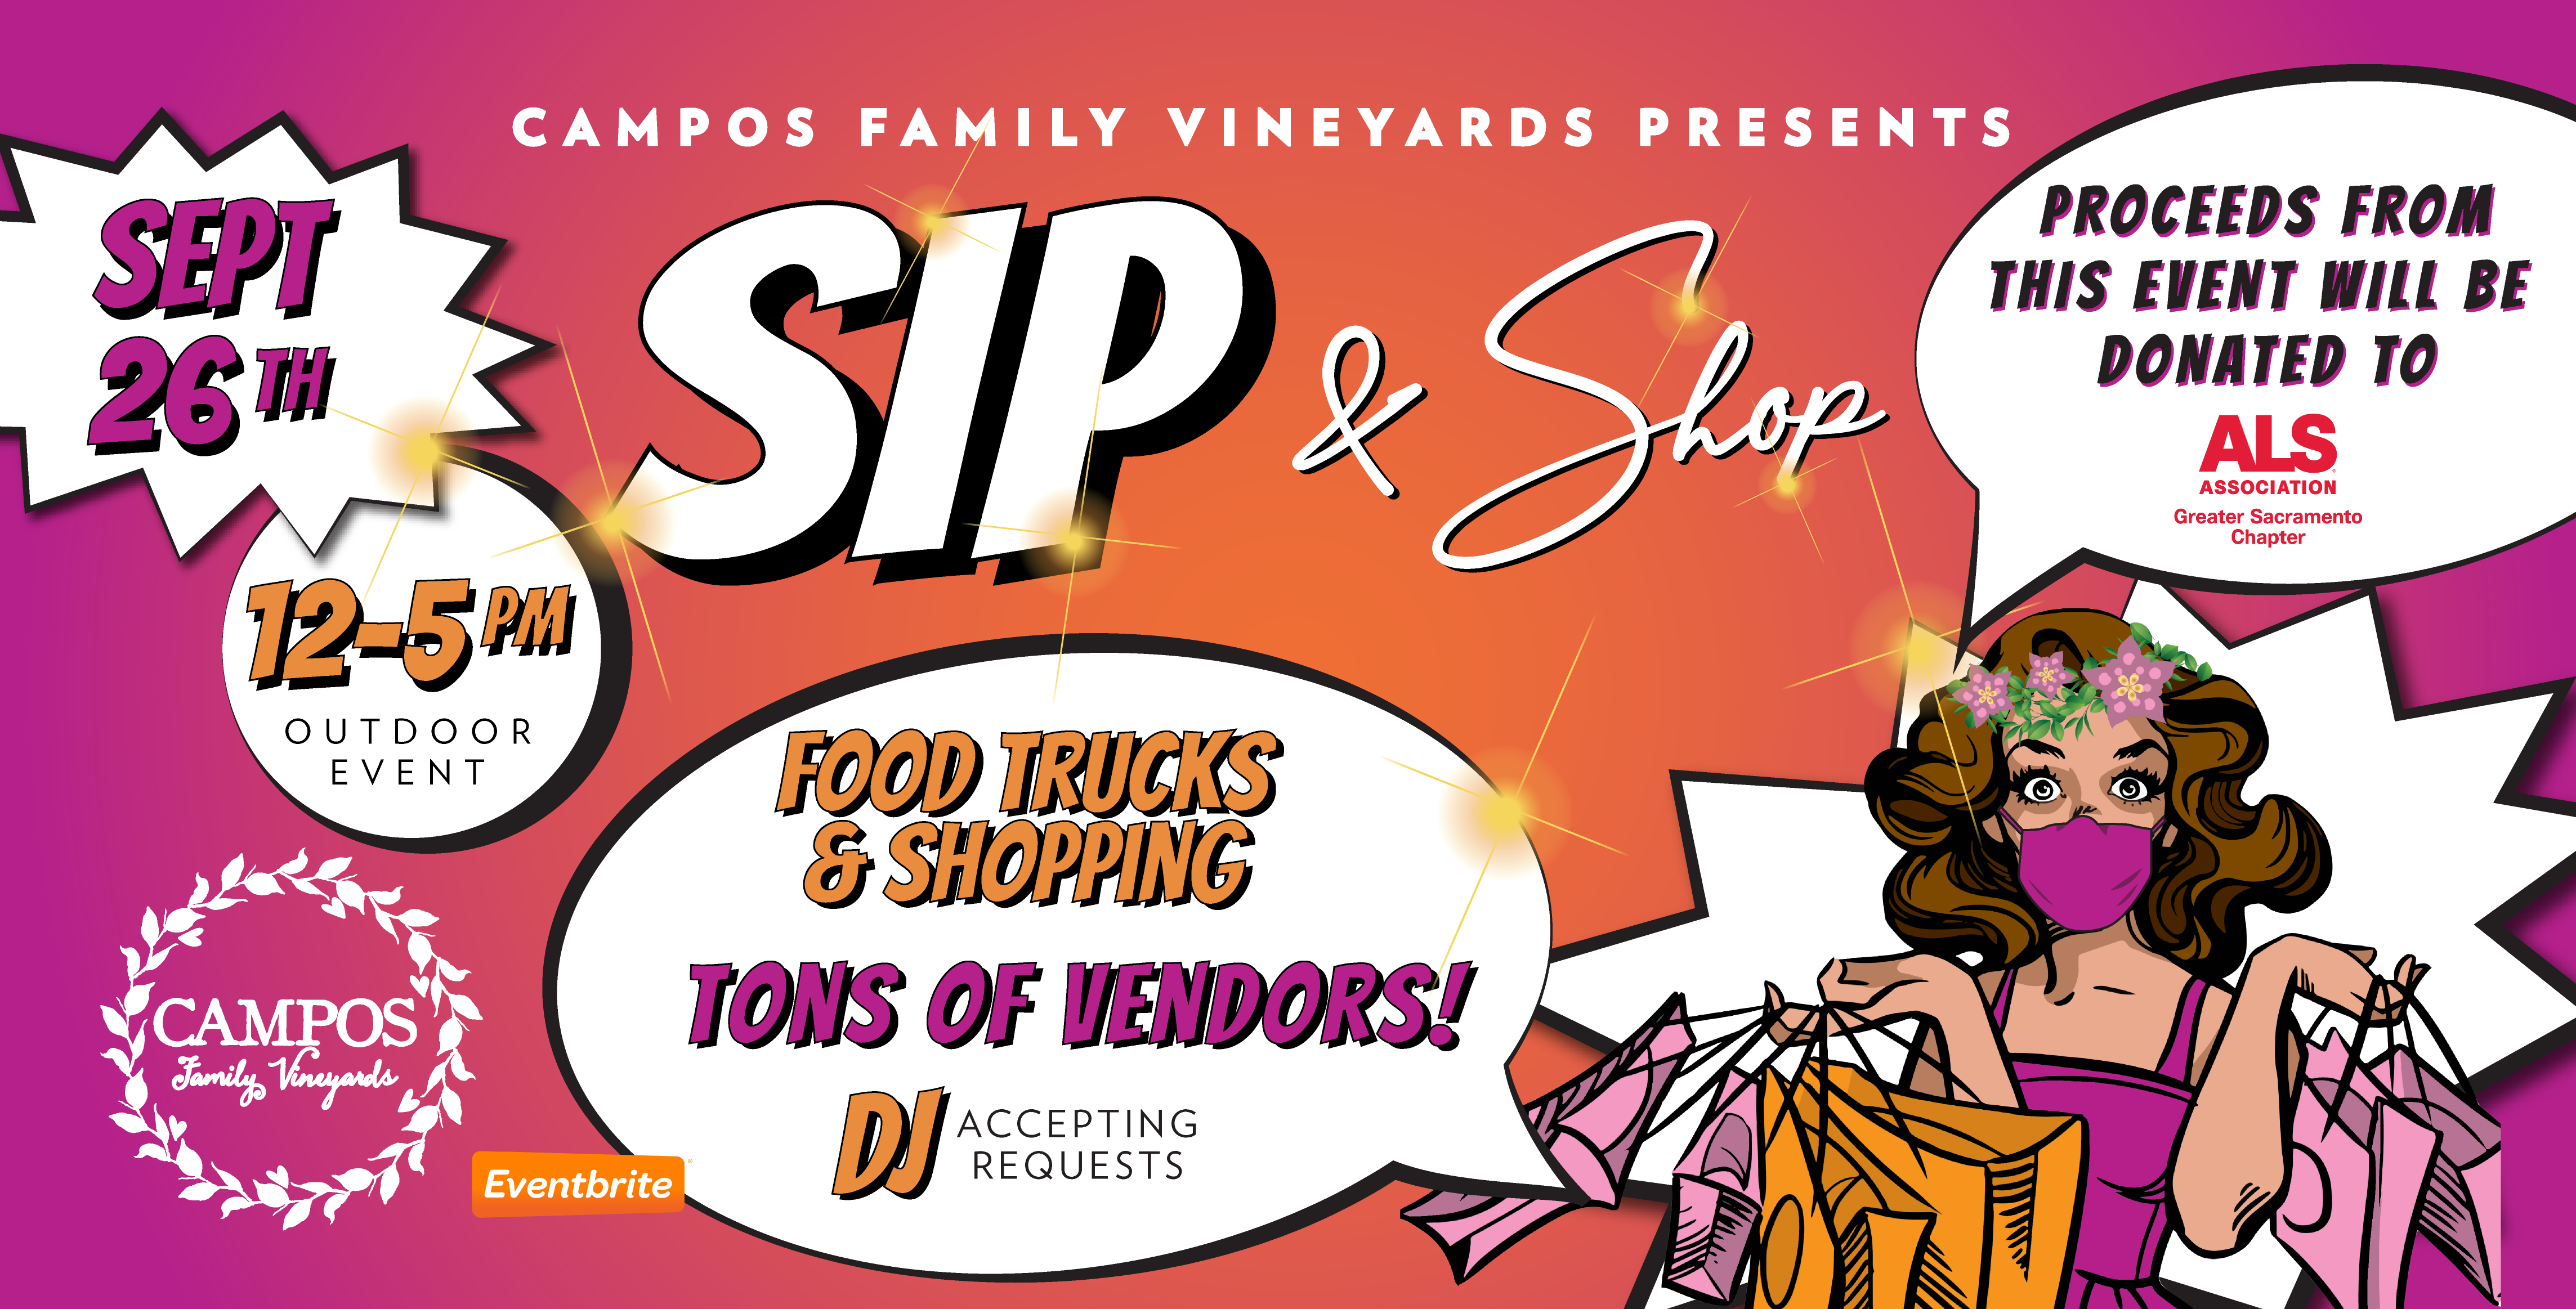 Sip & Shop Event at Campos Family Vineyards